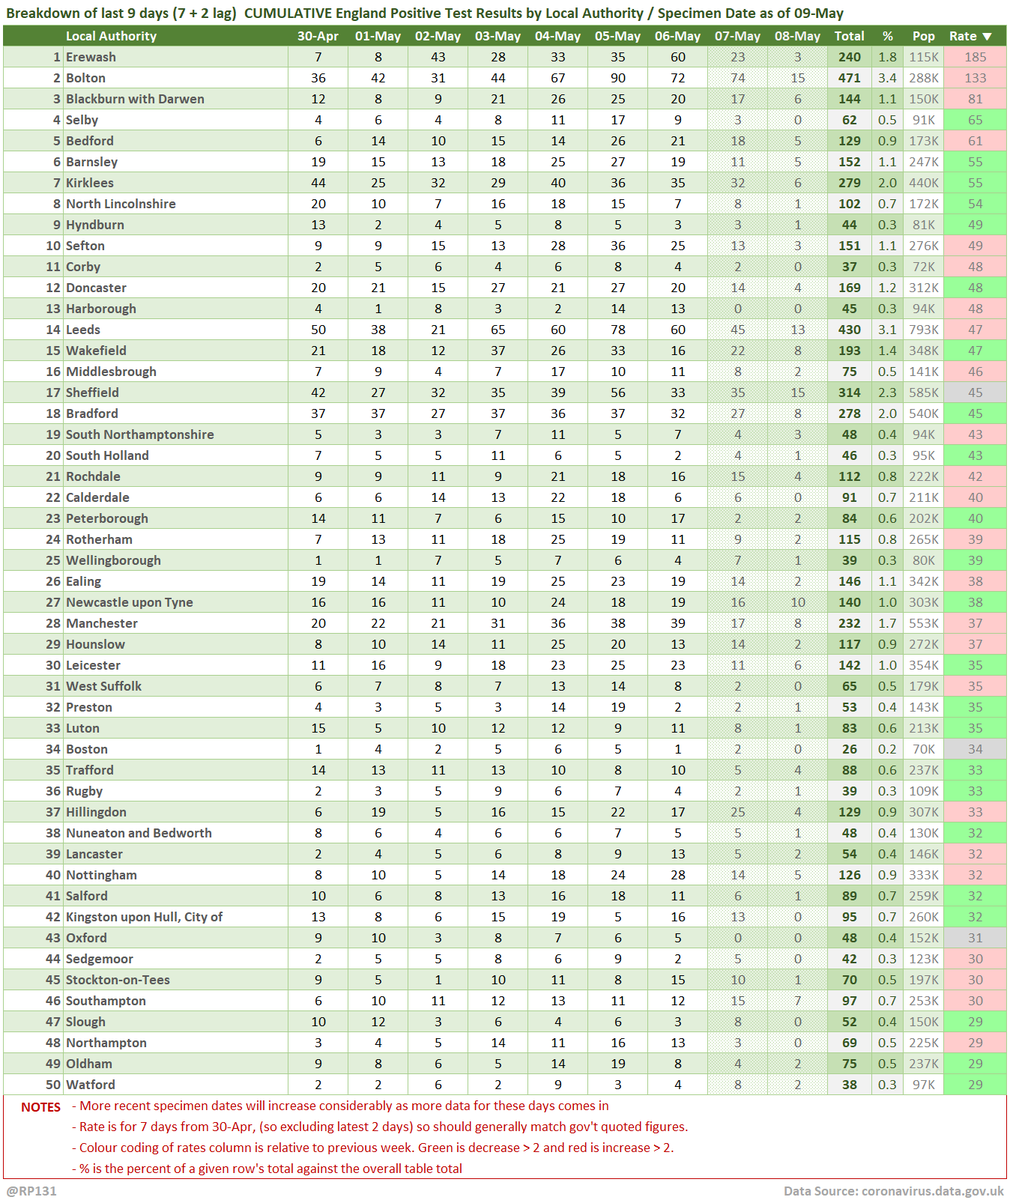  #covid19uk - Tables thread. Starting with the top 50 England Local Authorities by positives per 100K population in last 7 days, up to 3 days ago. Bright green means lower than previous period.